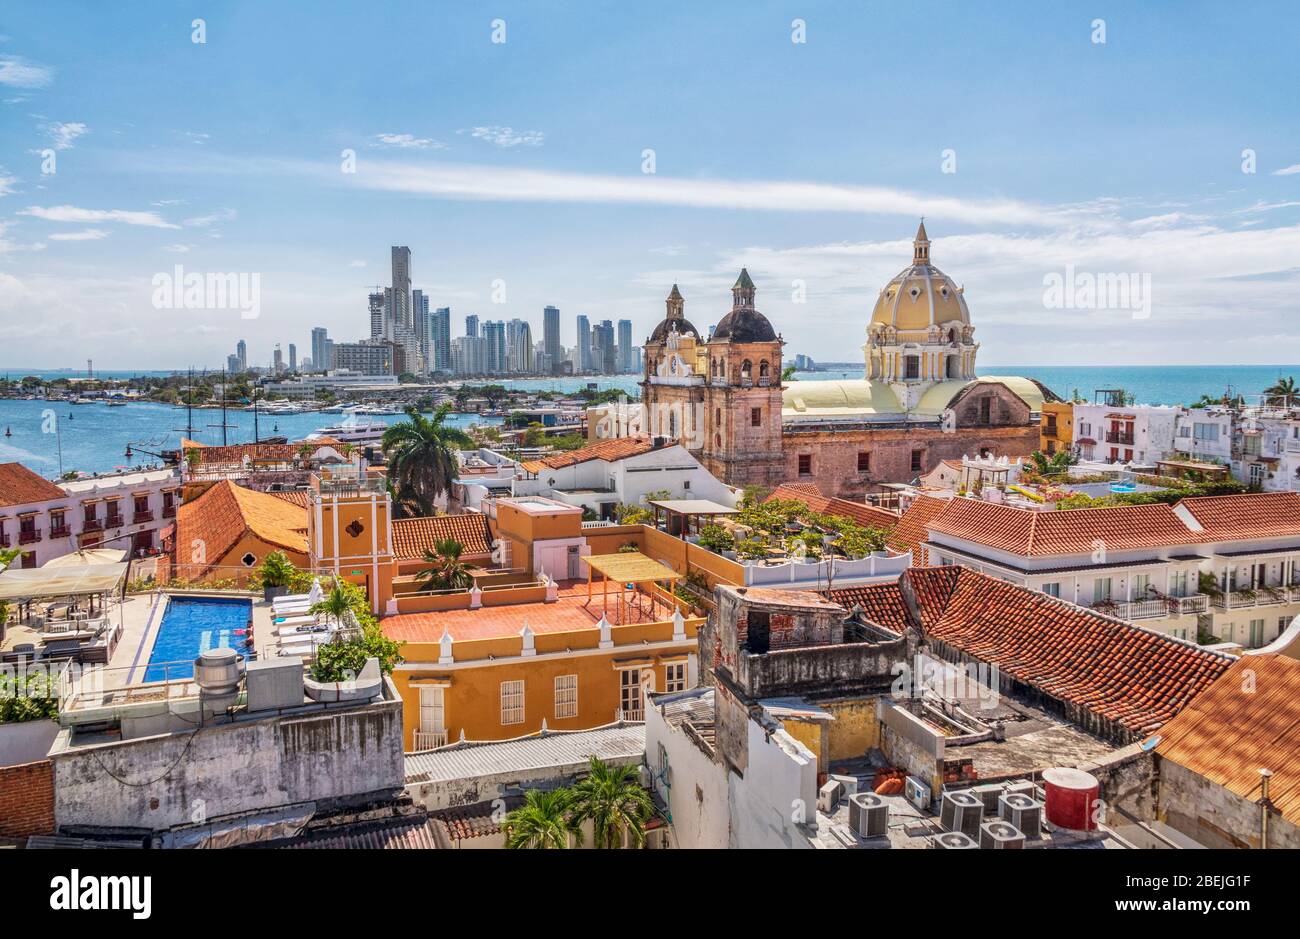 Cartagena - Colombia - South America - February 20, 2020: This church and its monastery are located in the Plaza de San Pedro Claver. Stock Photo